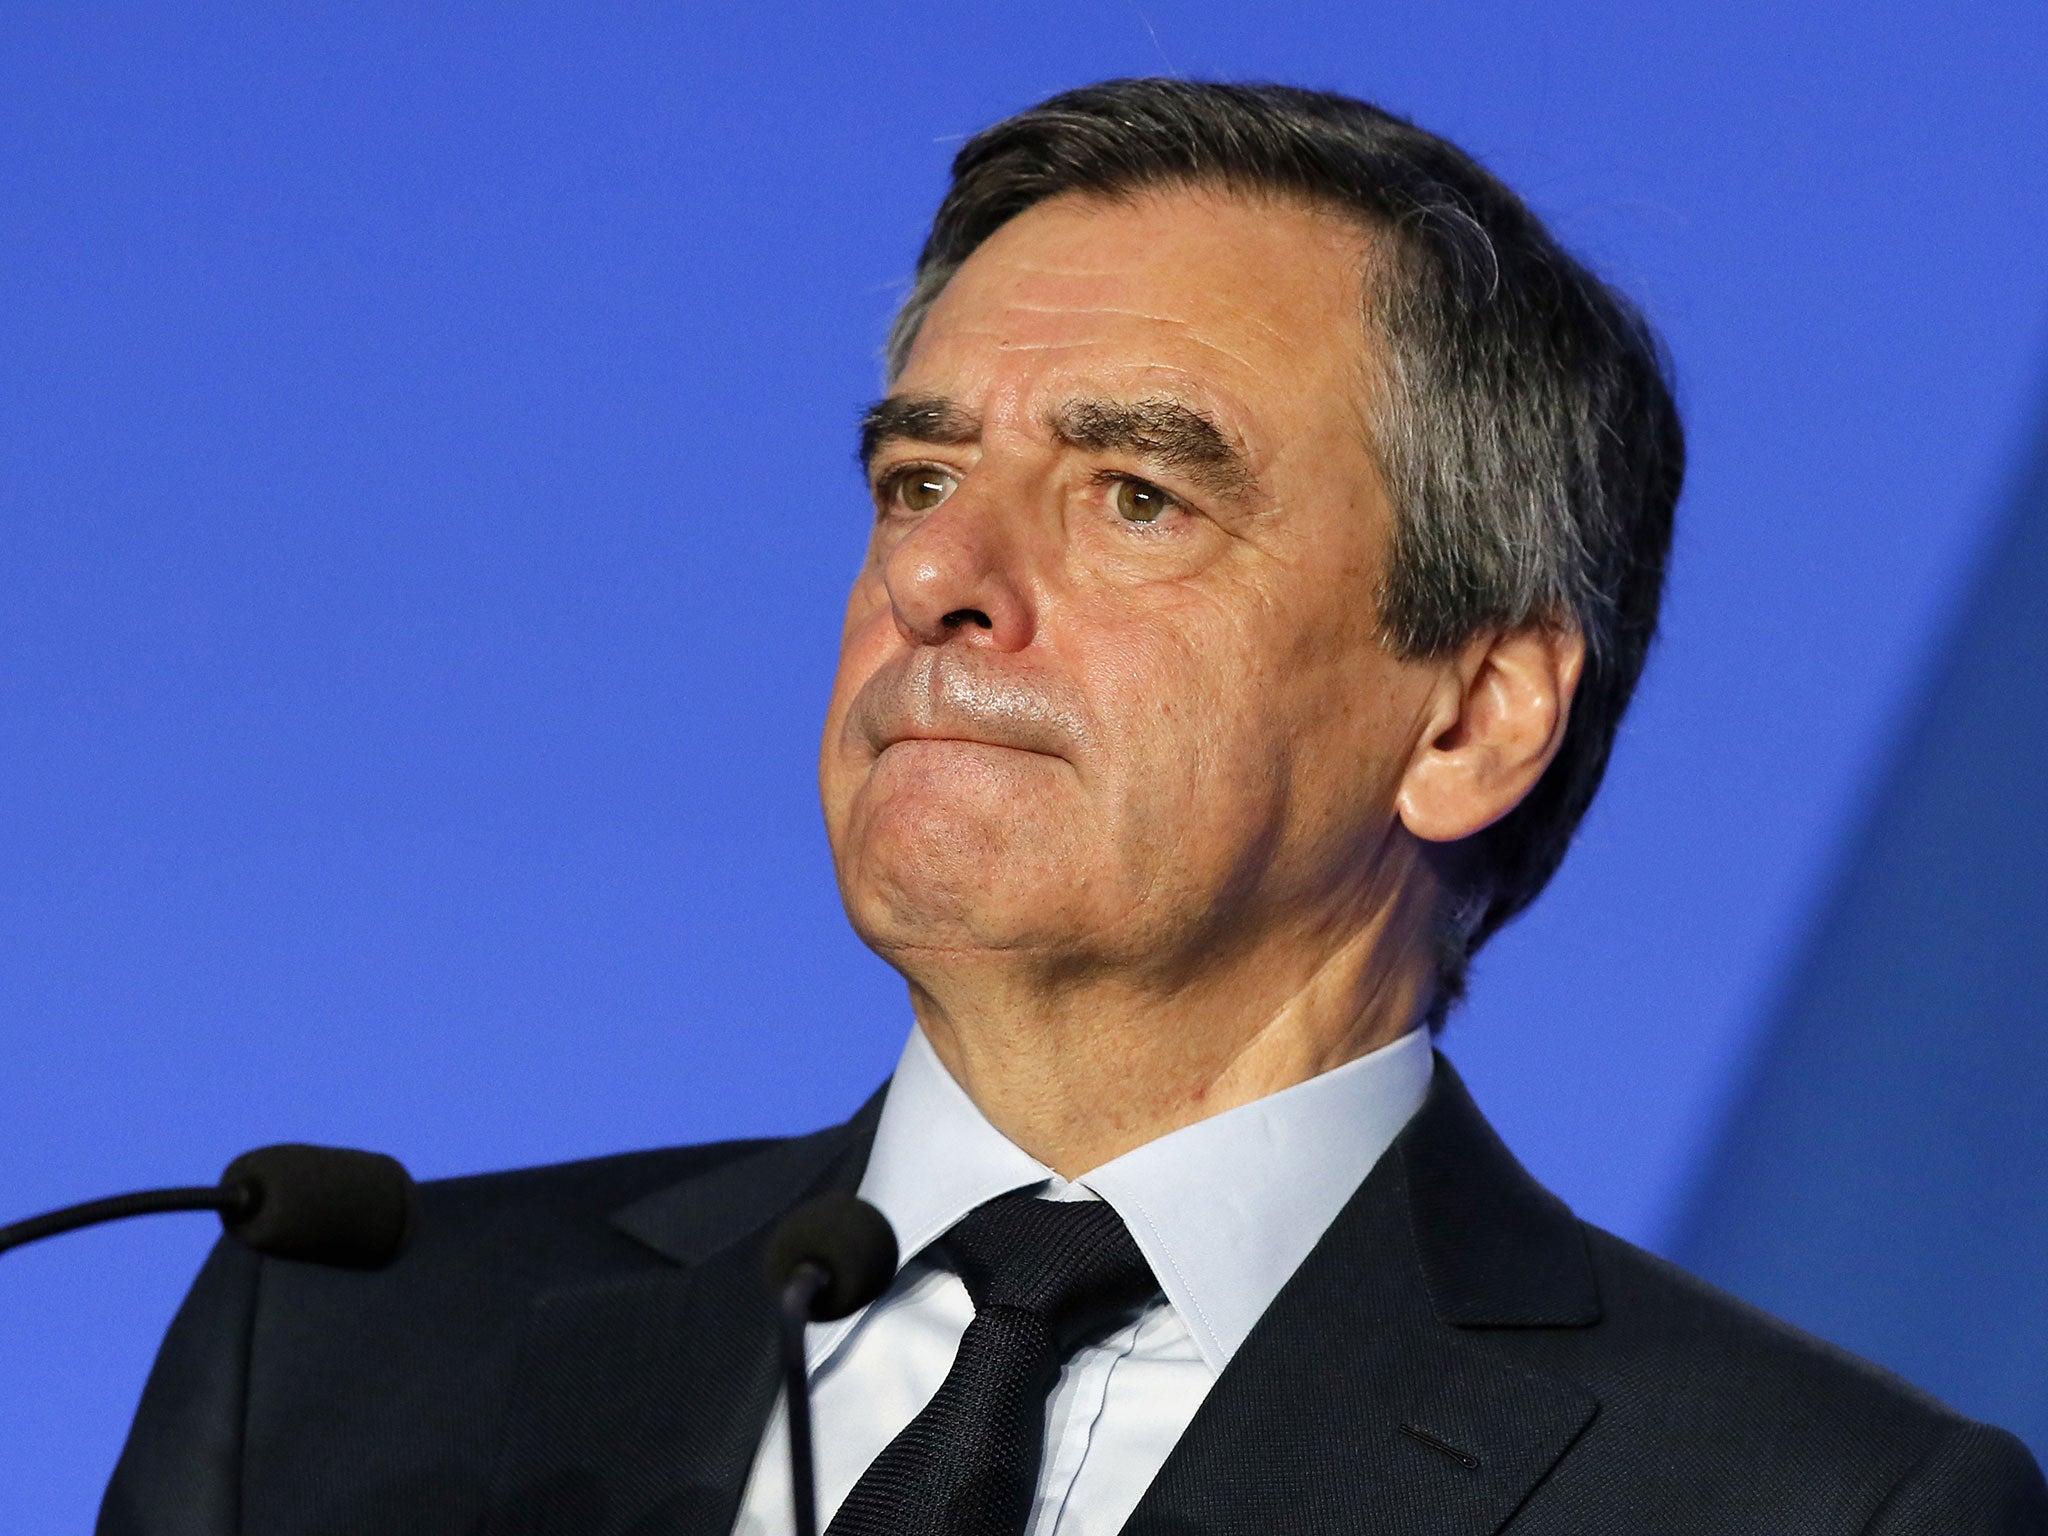 Parisian puzzler: generous jobs for family members, €13,000 tailoring requests, mysterious interest-free loans… something odd is going on with François Fillon